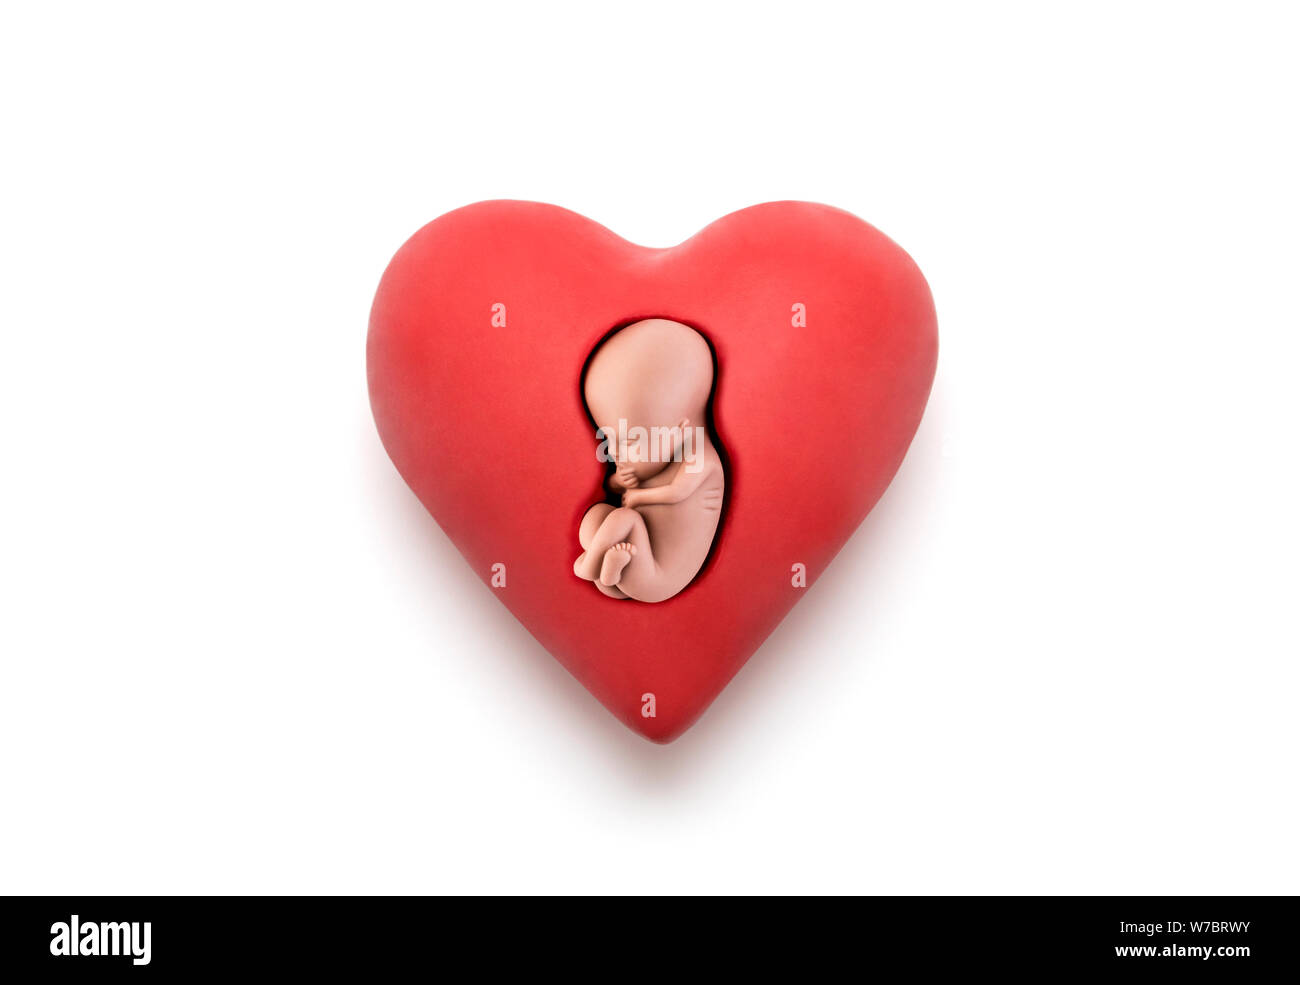 Human embryo in red heart on white background with clipping path Stock Photo